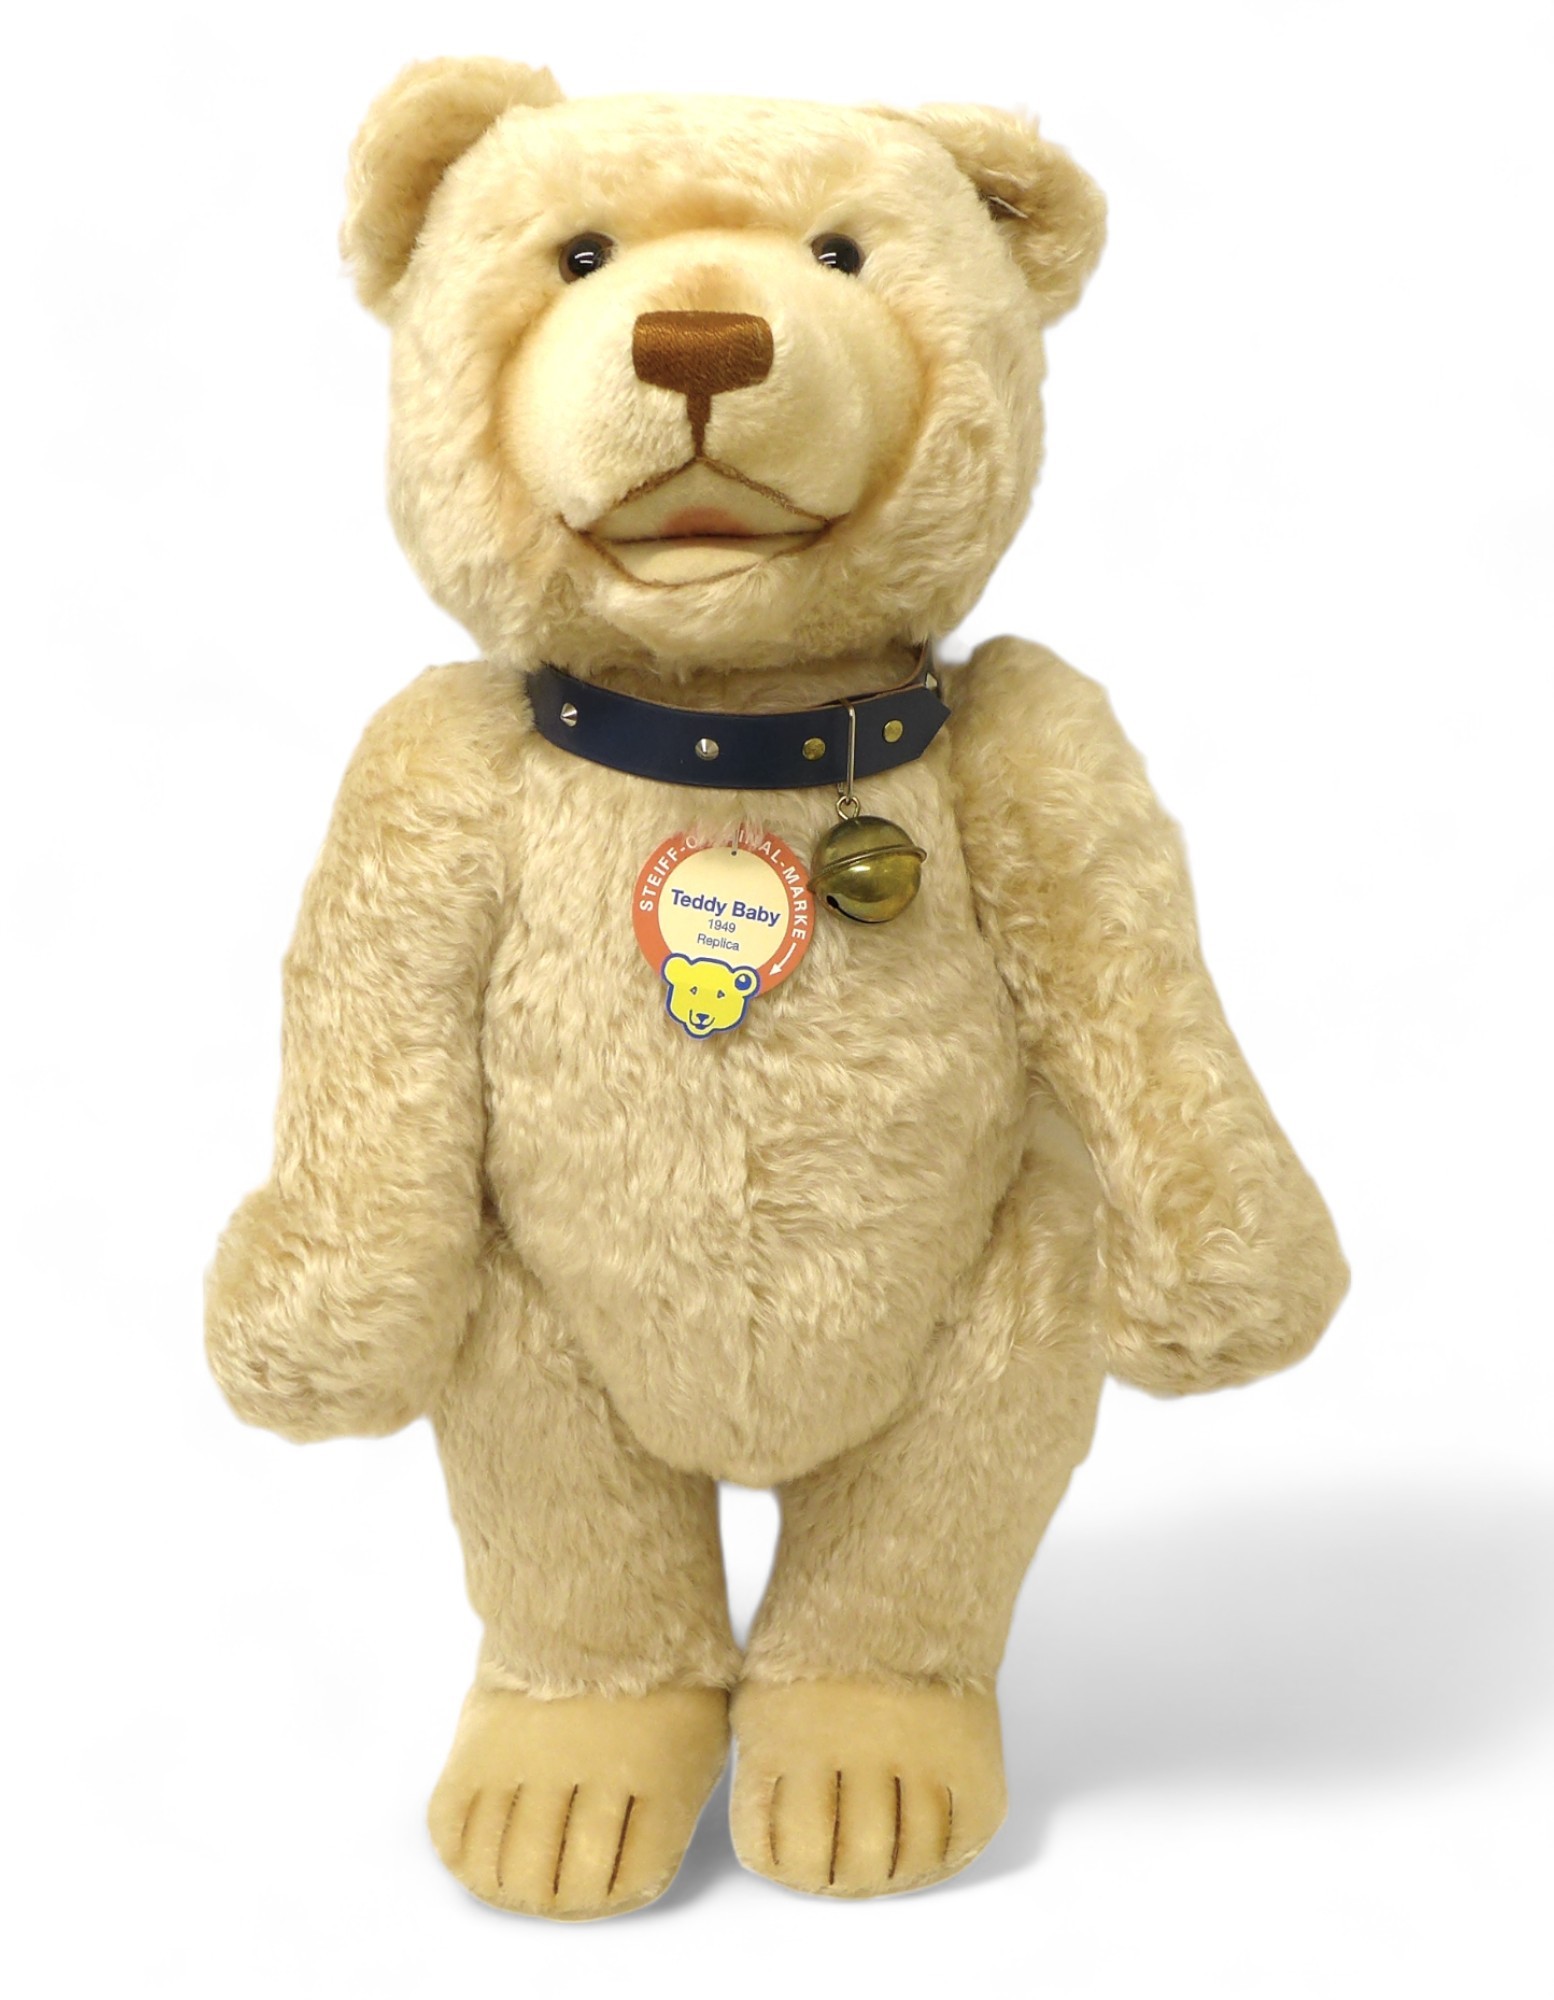 Steiff Teddy Baby 1949 replica, maize mohair posable five jointed bear standing 75cm tall, with open - Image 4 of 12